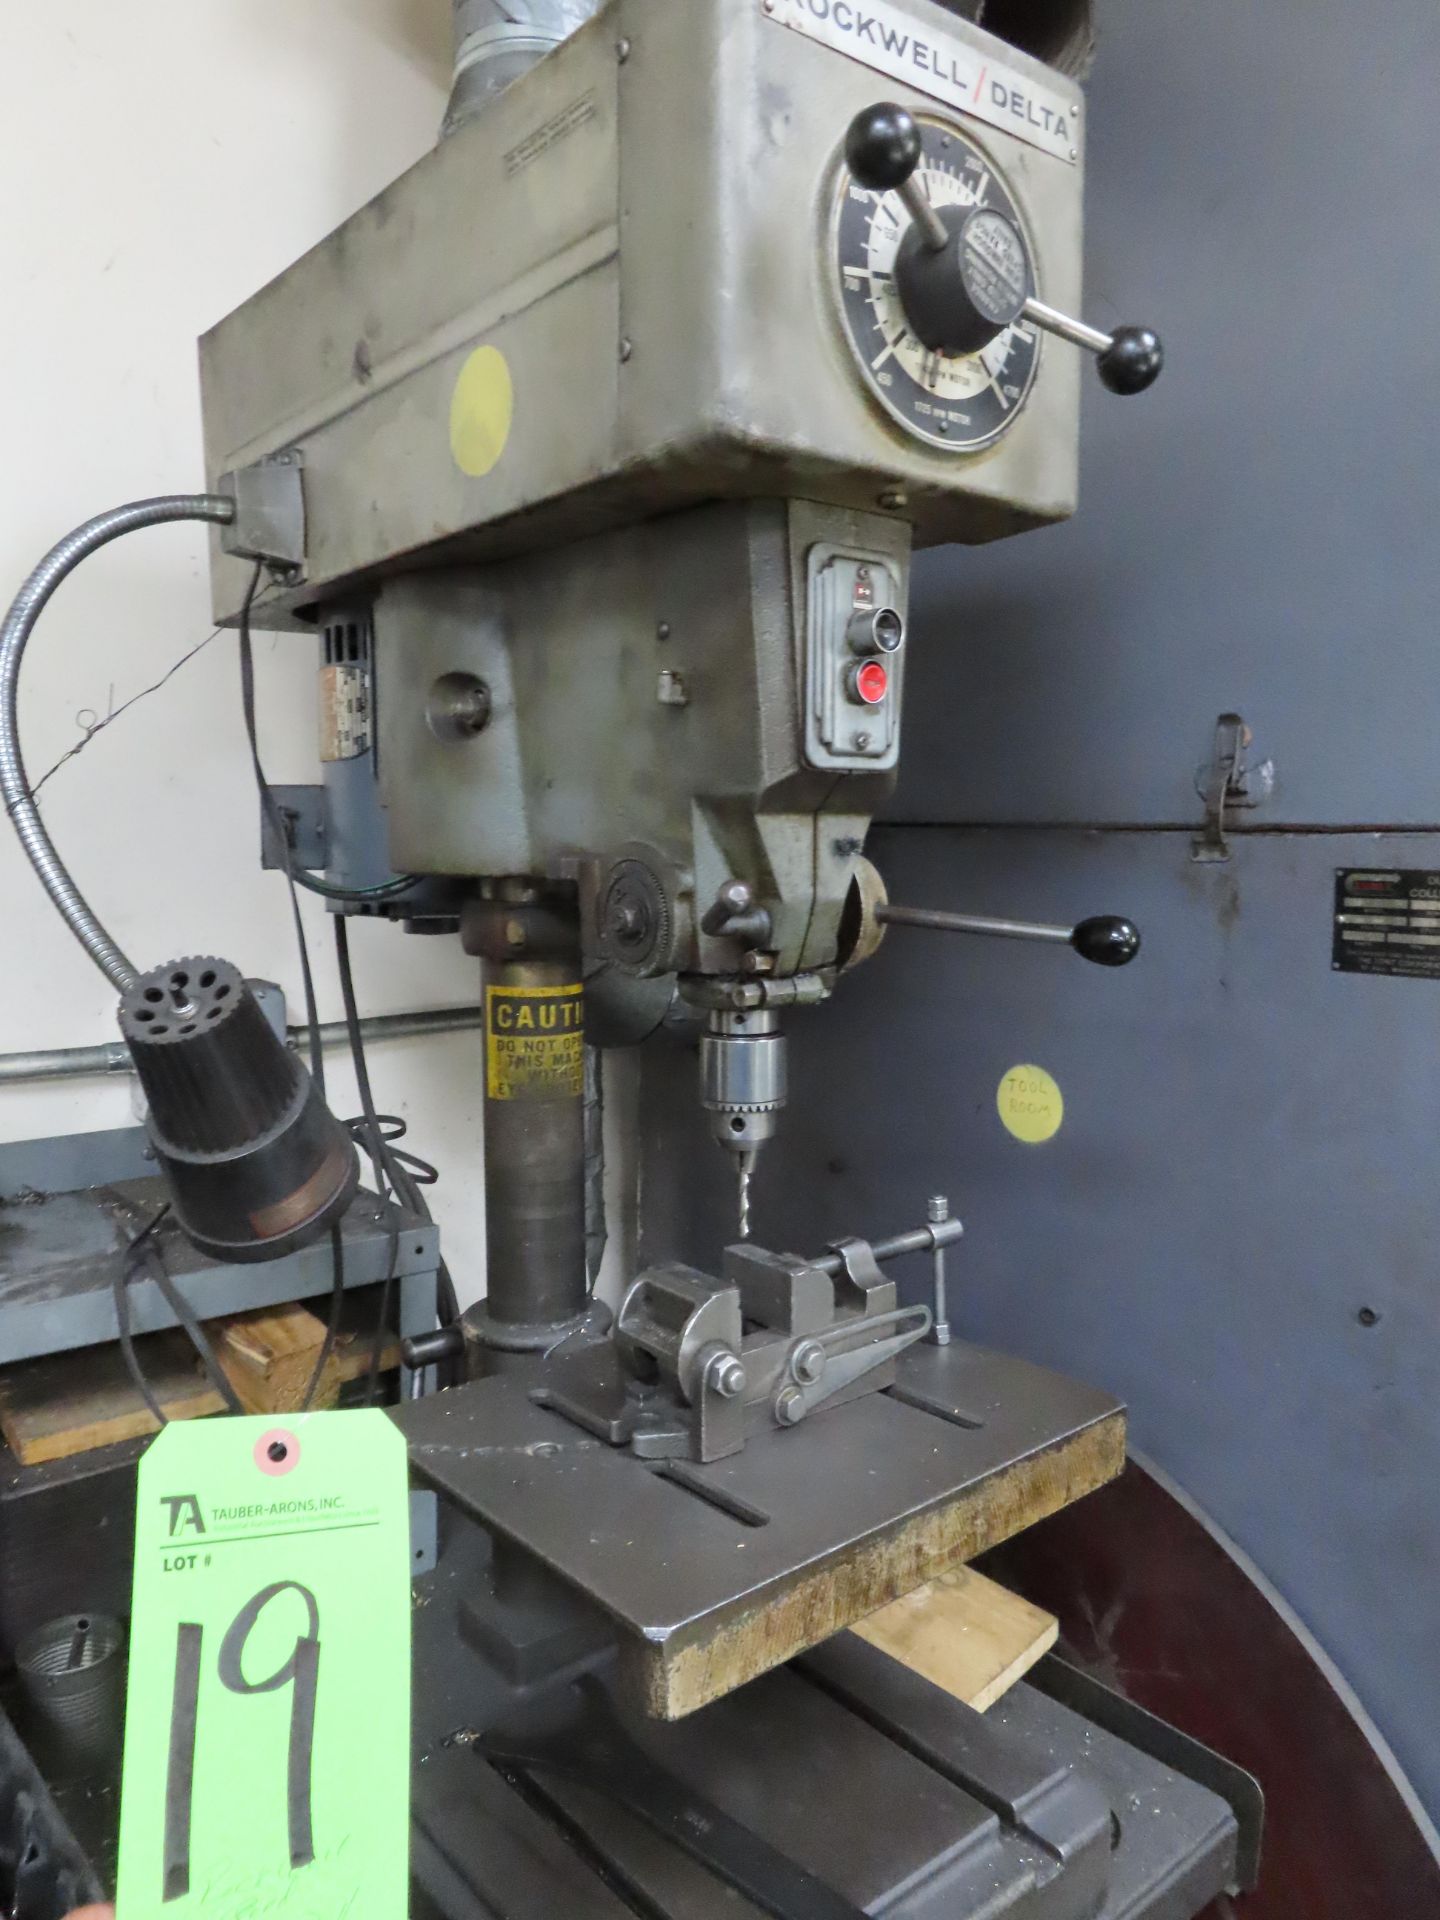 Rockwell/Delta Bench Type Drill Press